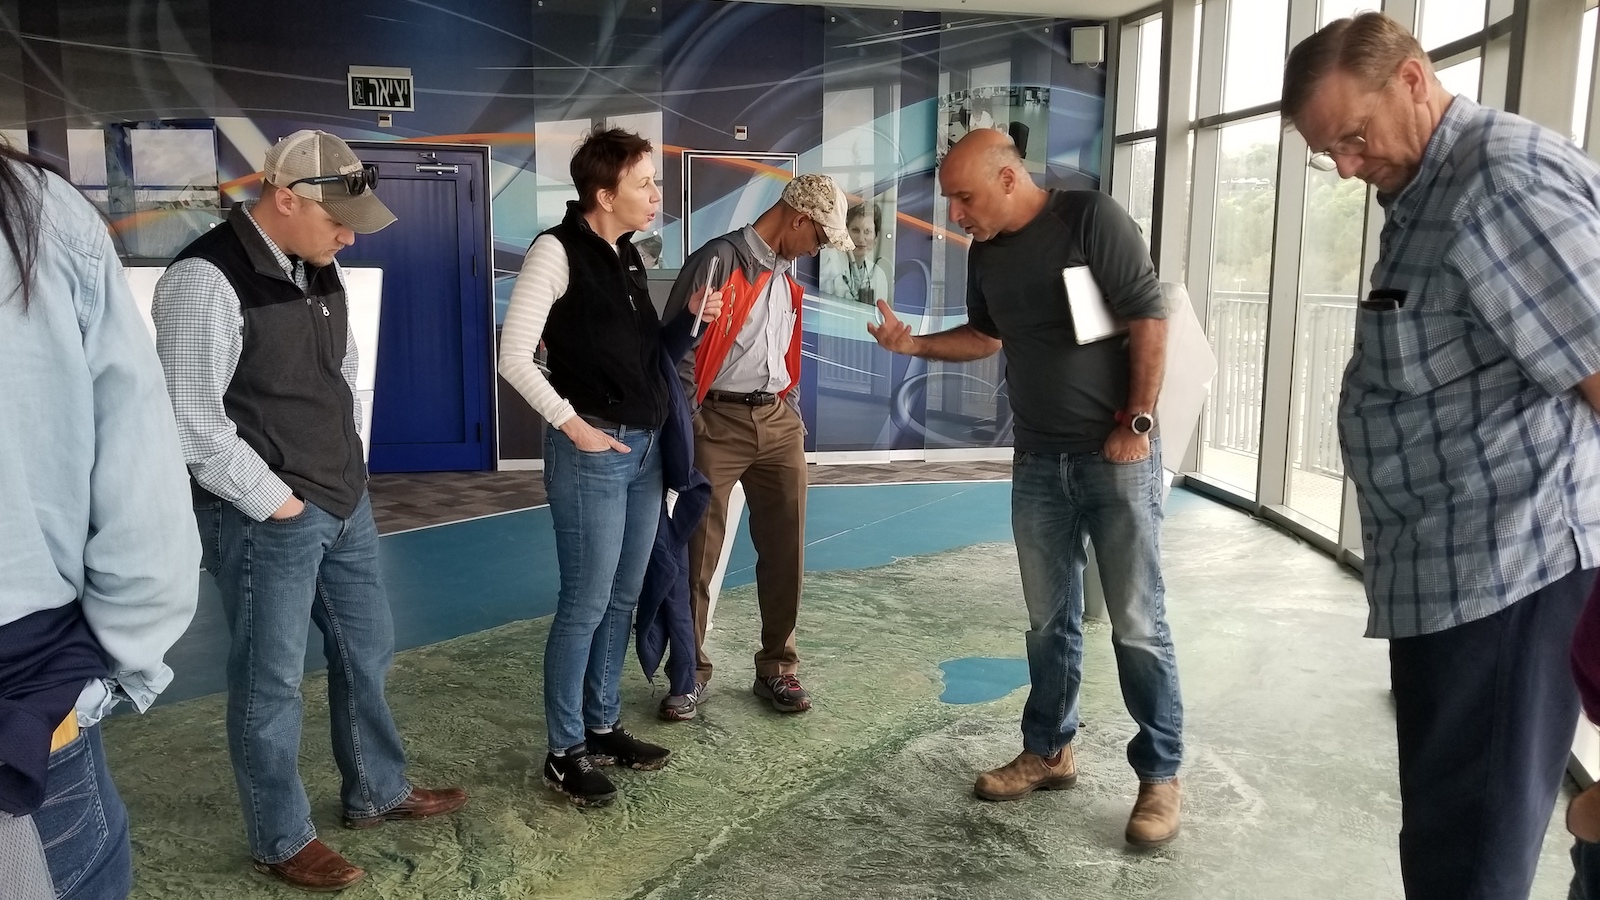 The NIFA project team visited Israel for a week in March 2019 to exchange ideas and understanding about how Israel has managed its water resources. Photo credit: USDA